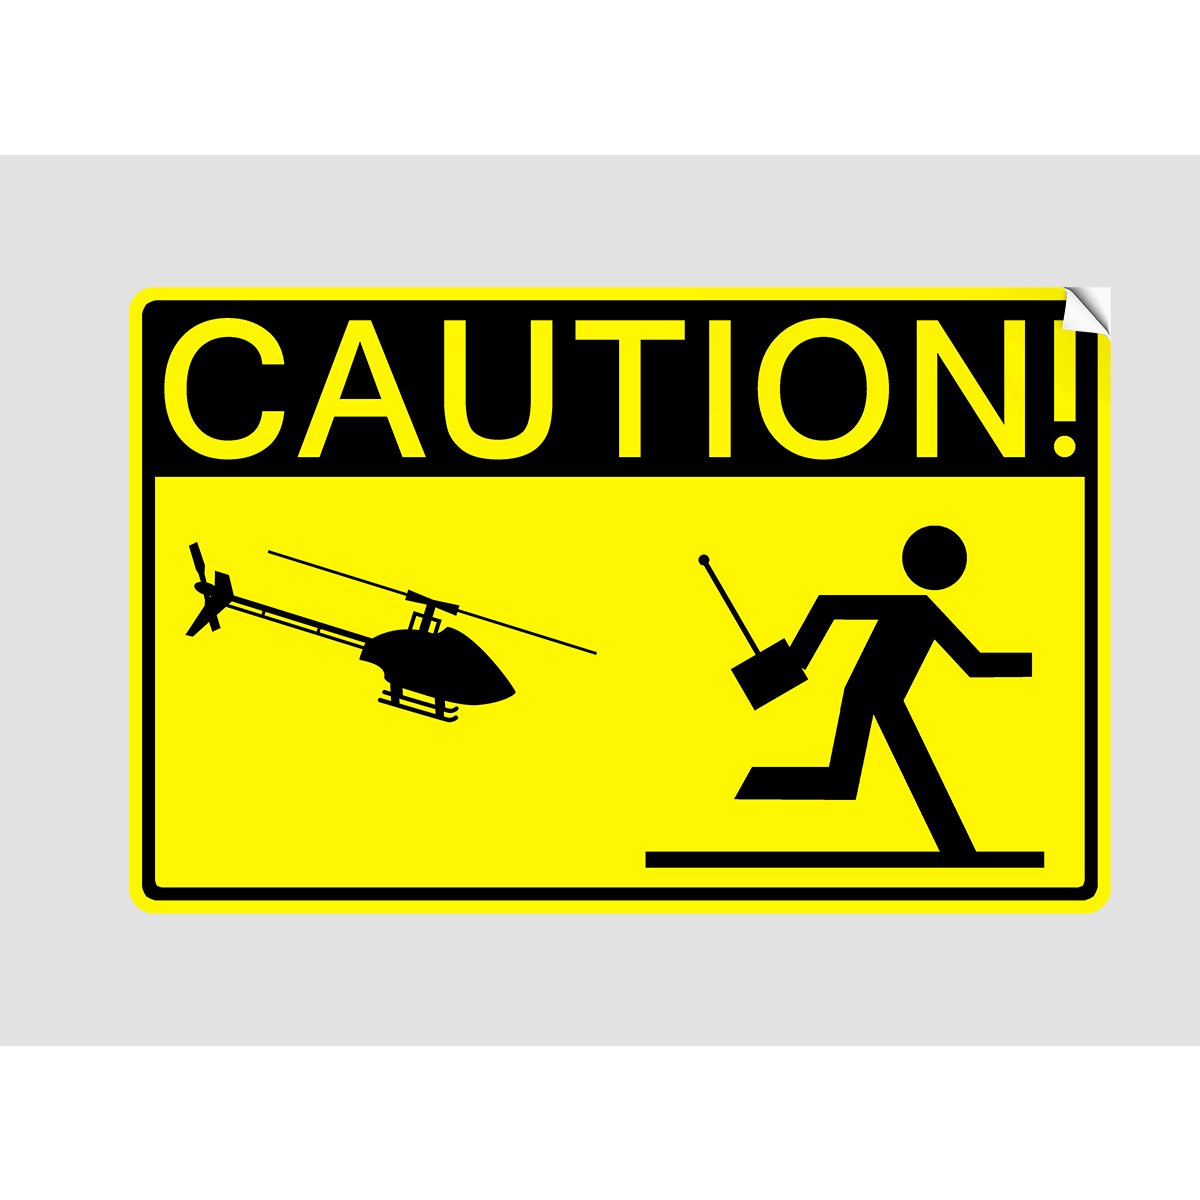 CAUTION! HELICOPTER PILOT Sticker